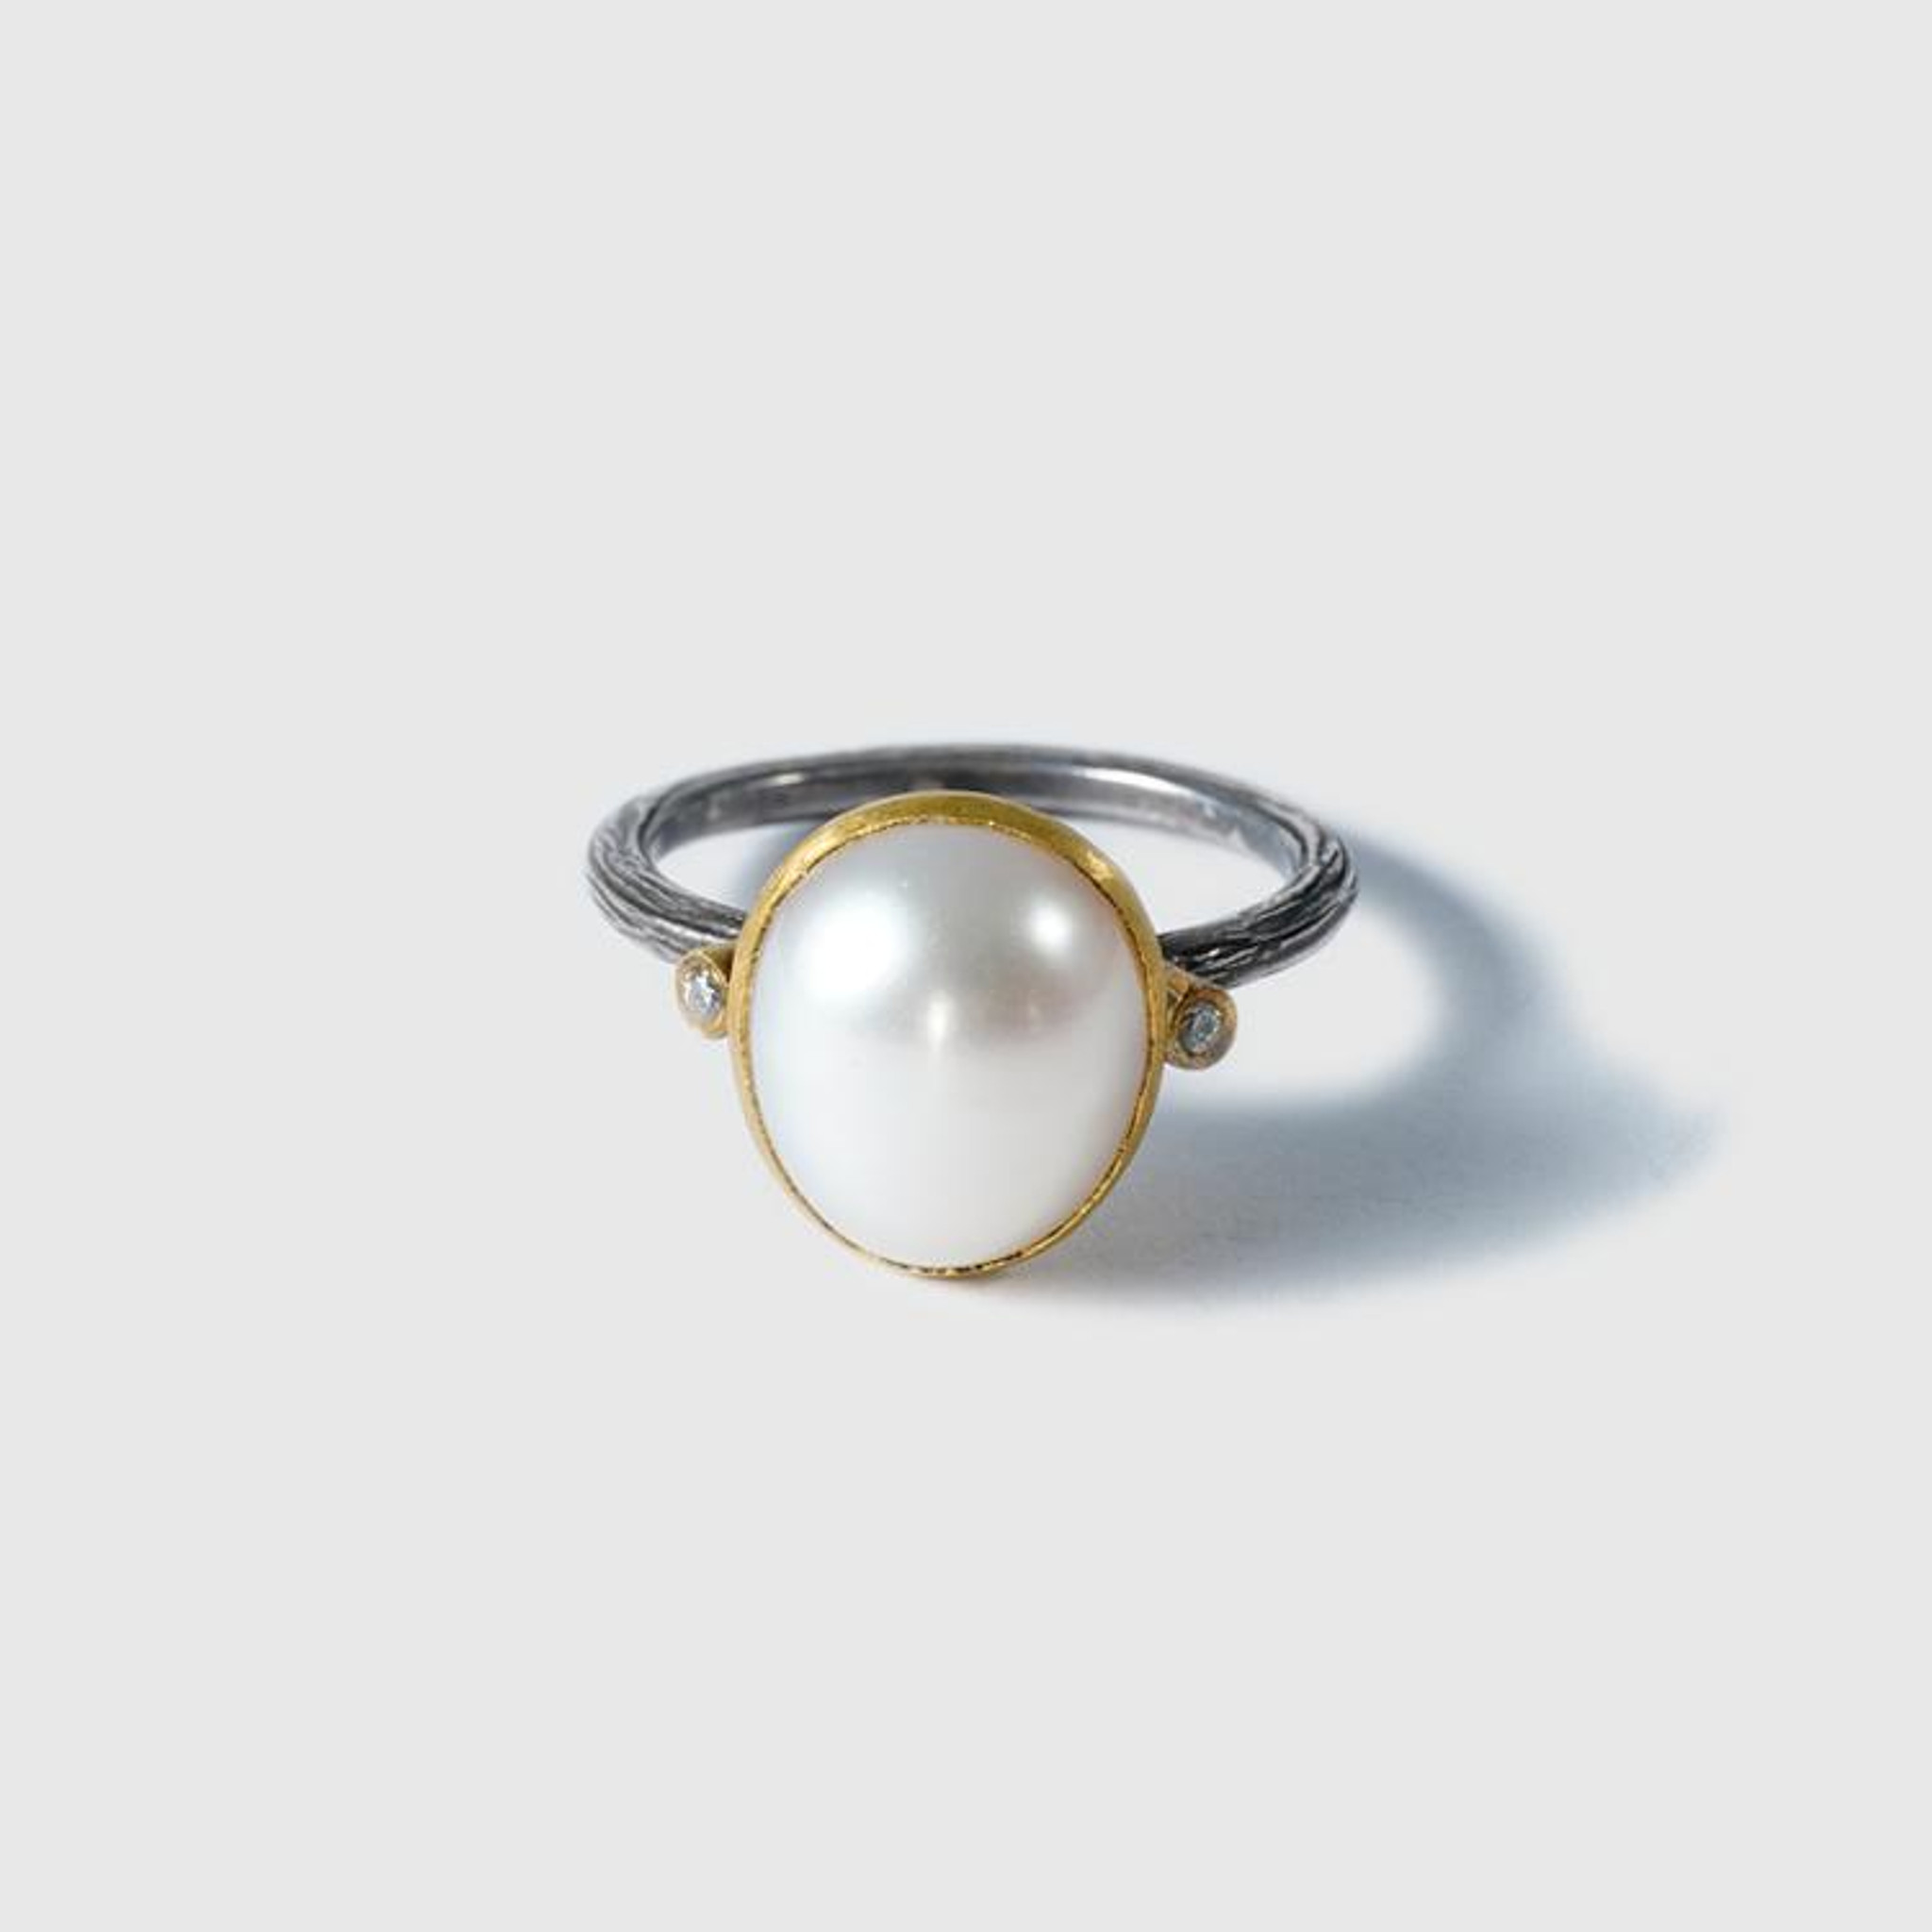 Prehistoric Works Domed Oval Pearl Ring with Two Diamonds, 24kt Gold and Silver 